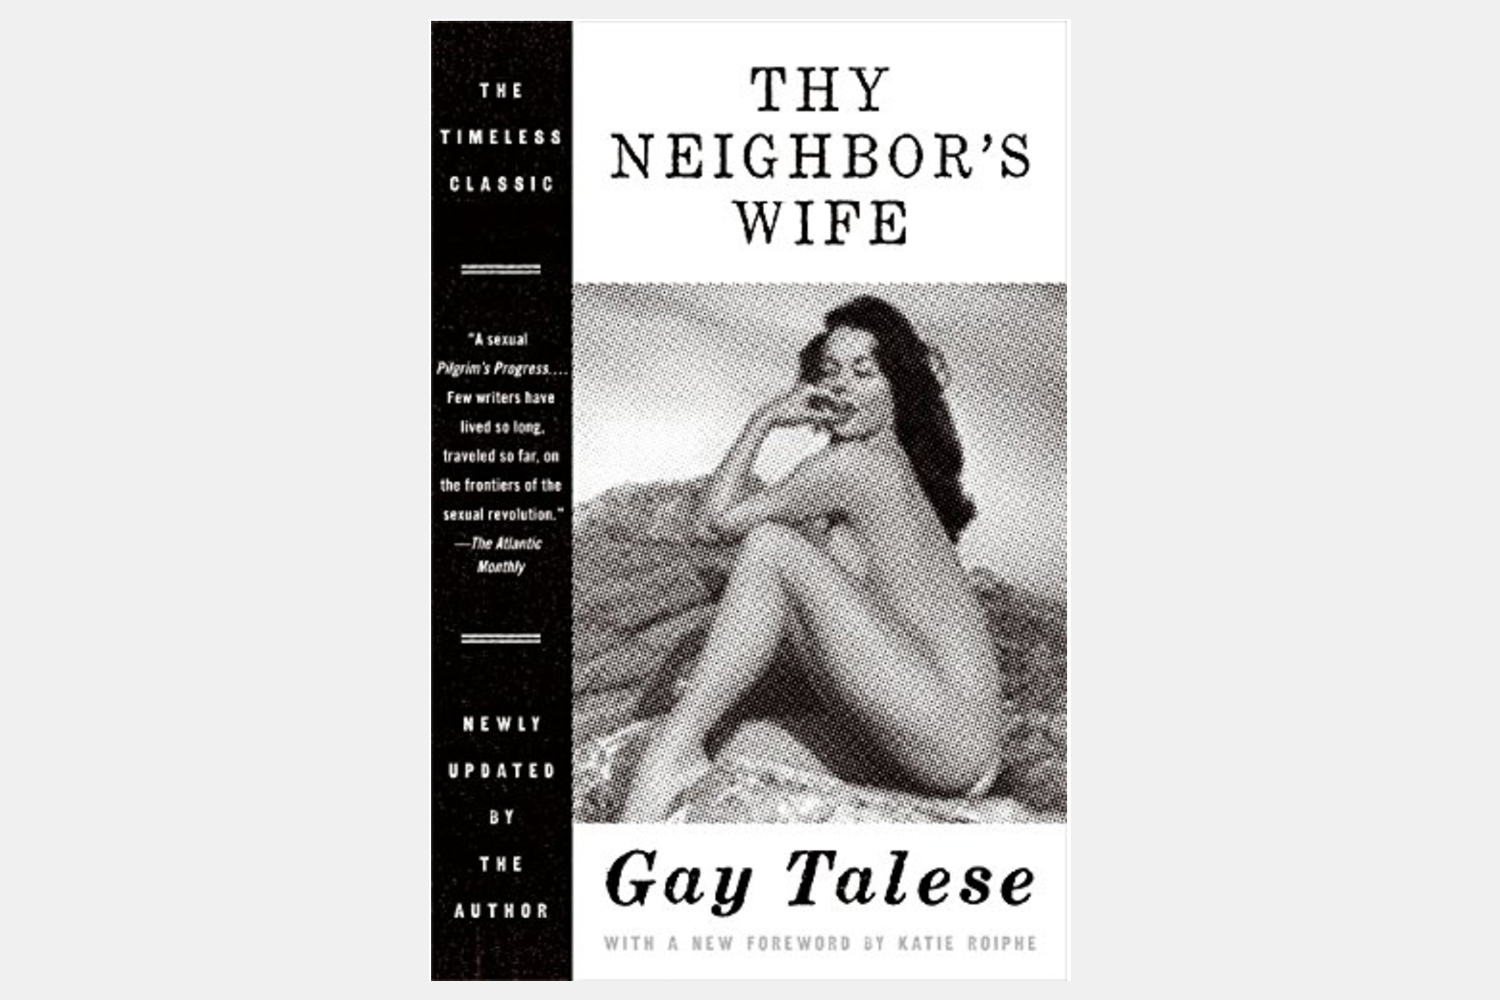 How Gay Talese Ingnited the Original “Horny on Main” Movement